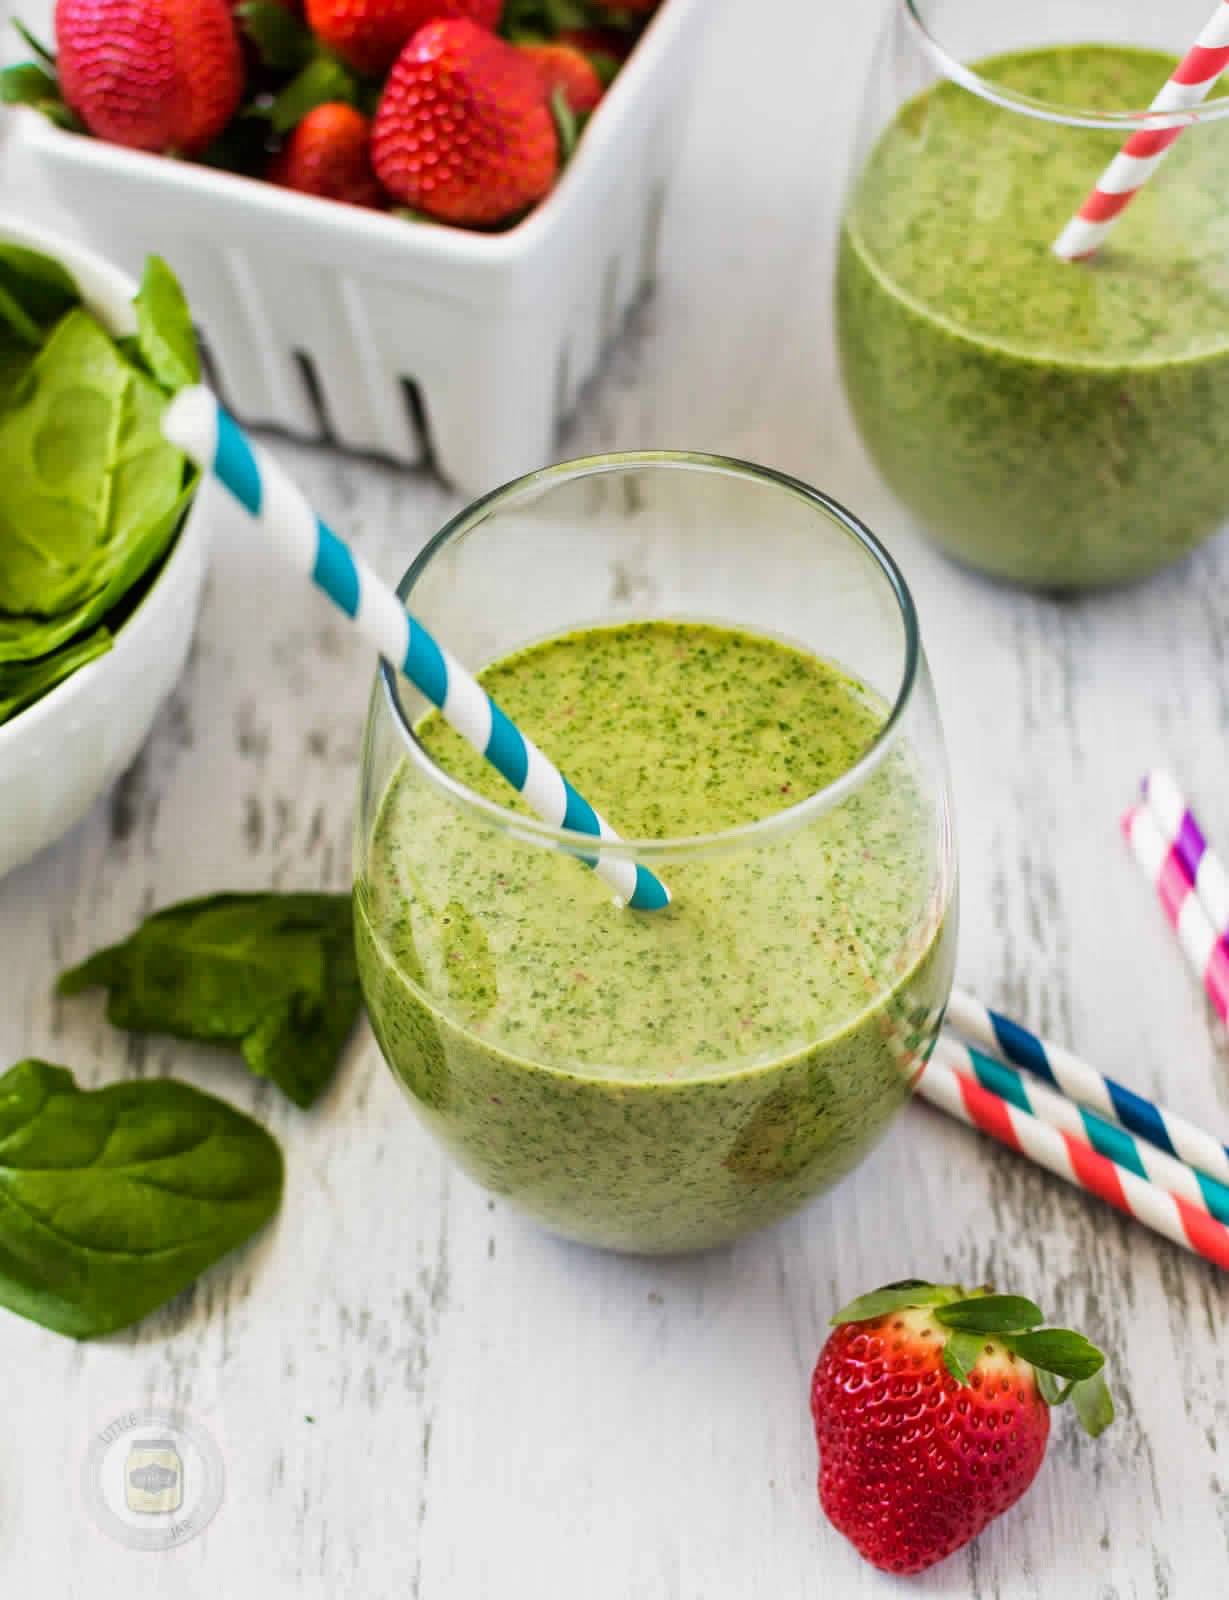 Simple Weight Loss Smoothies
 